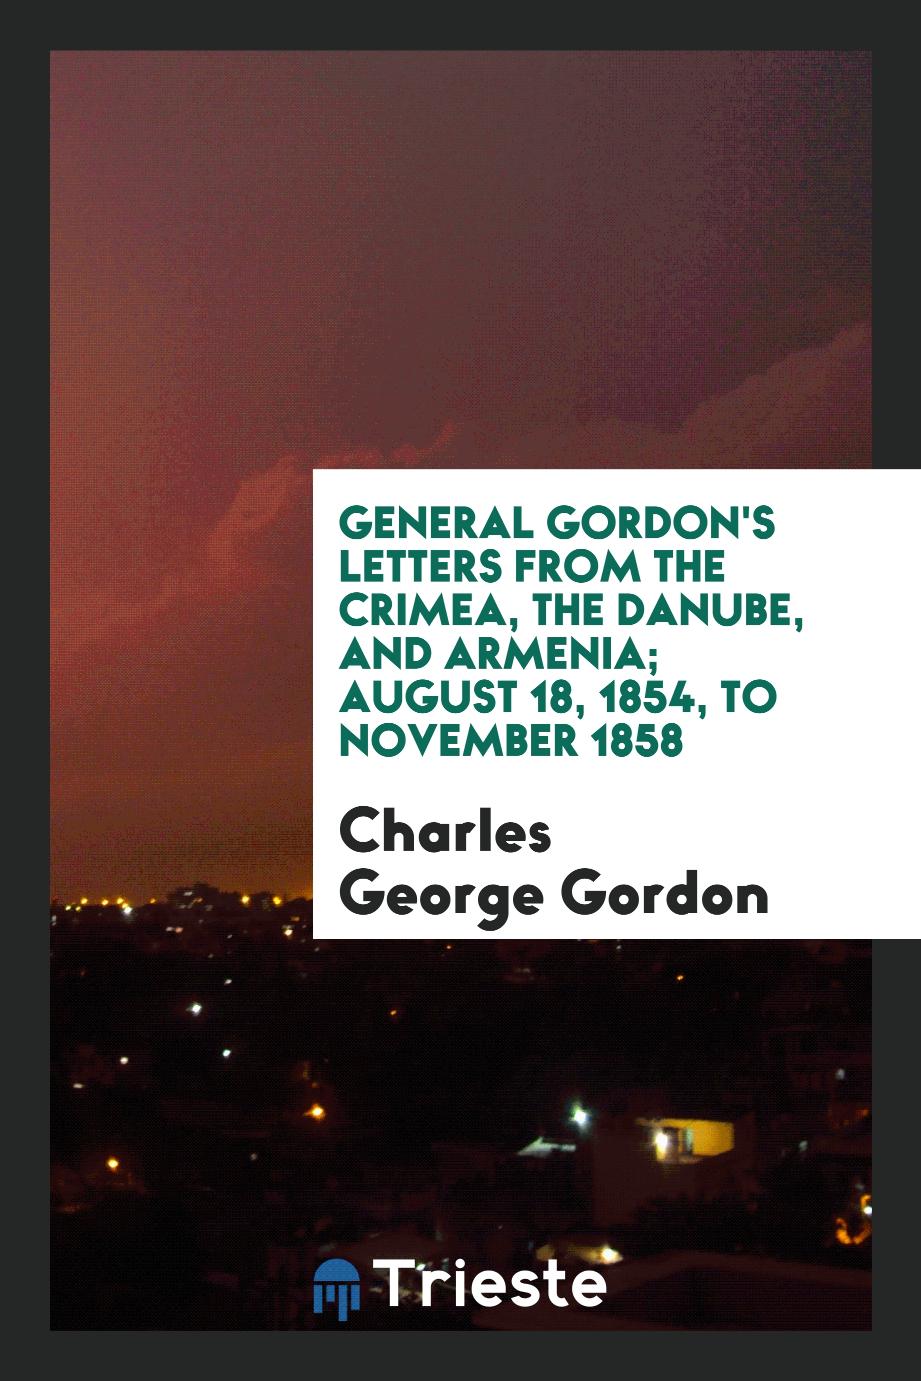 General Gordon's letters from the Crimea, the Danube, and Armenia; August 18, 1854, to November 1858